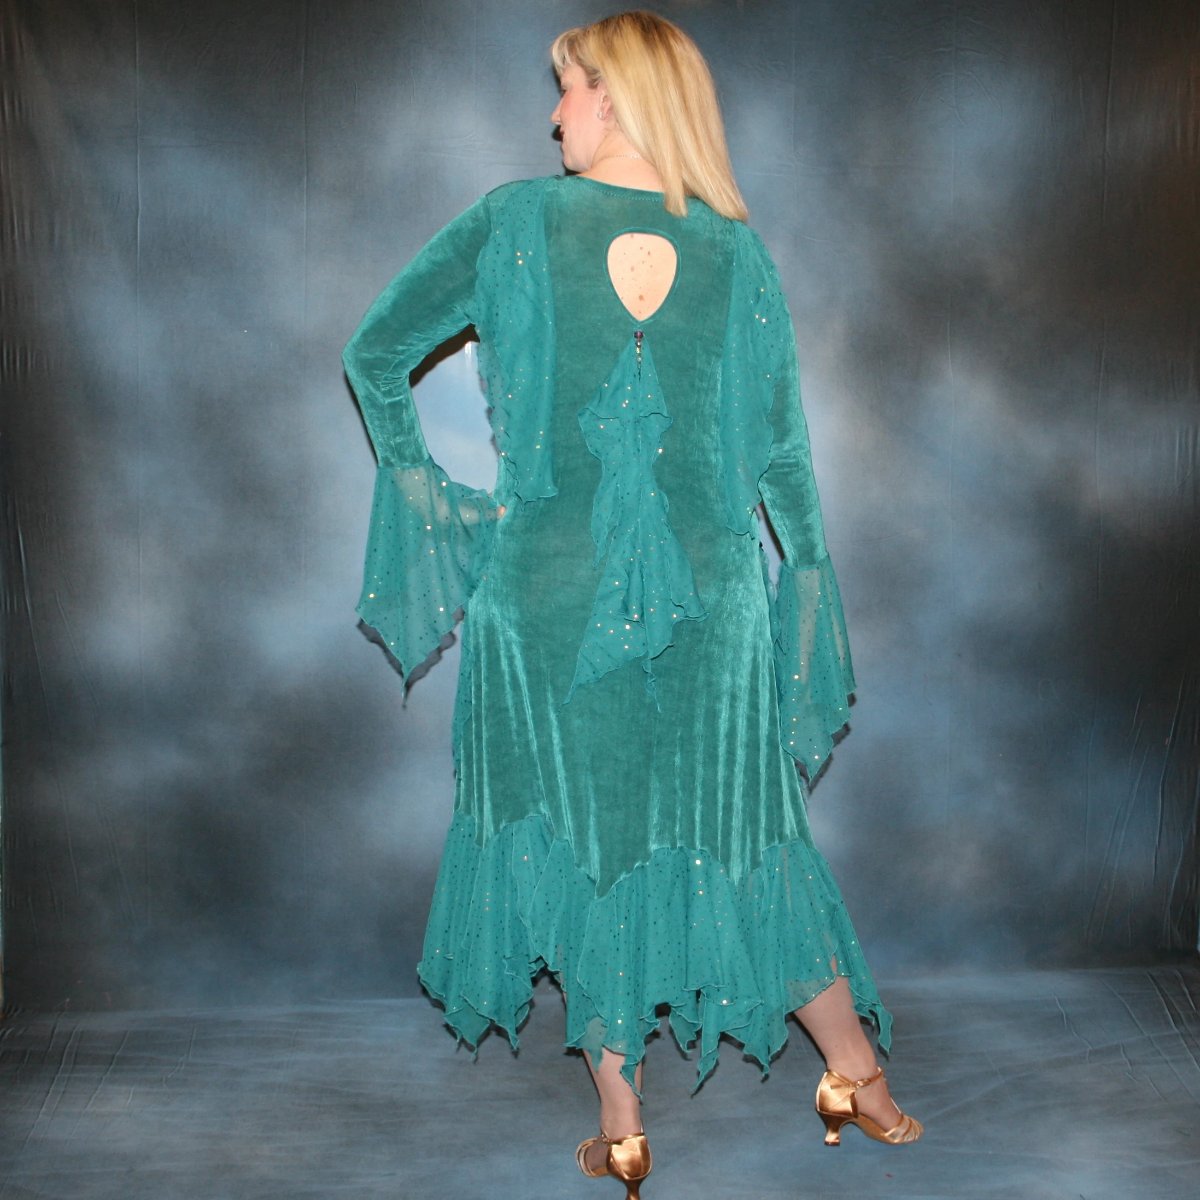 back view of Teal plus size ballroom dance dress was created in luxurious teal solid slinky with oodles of champagne sequined chiffon flounces & floats, embellished with a lovely touch of Swarovski hand beading on a blonde model